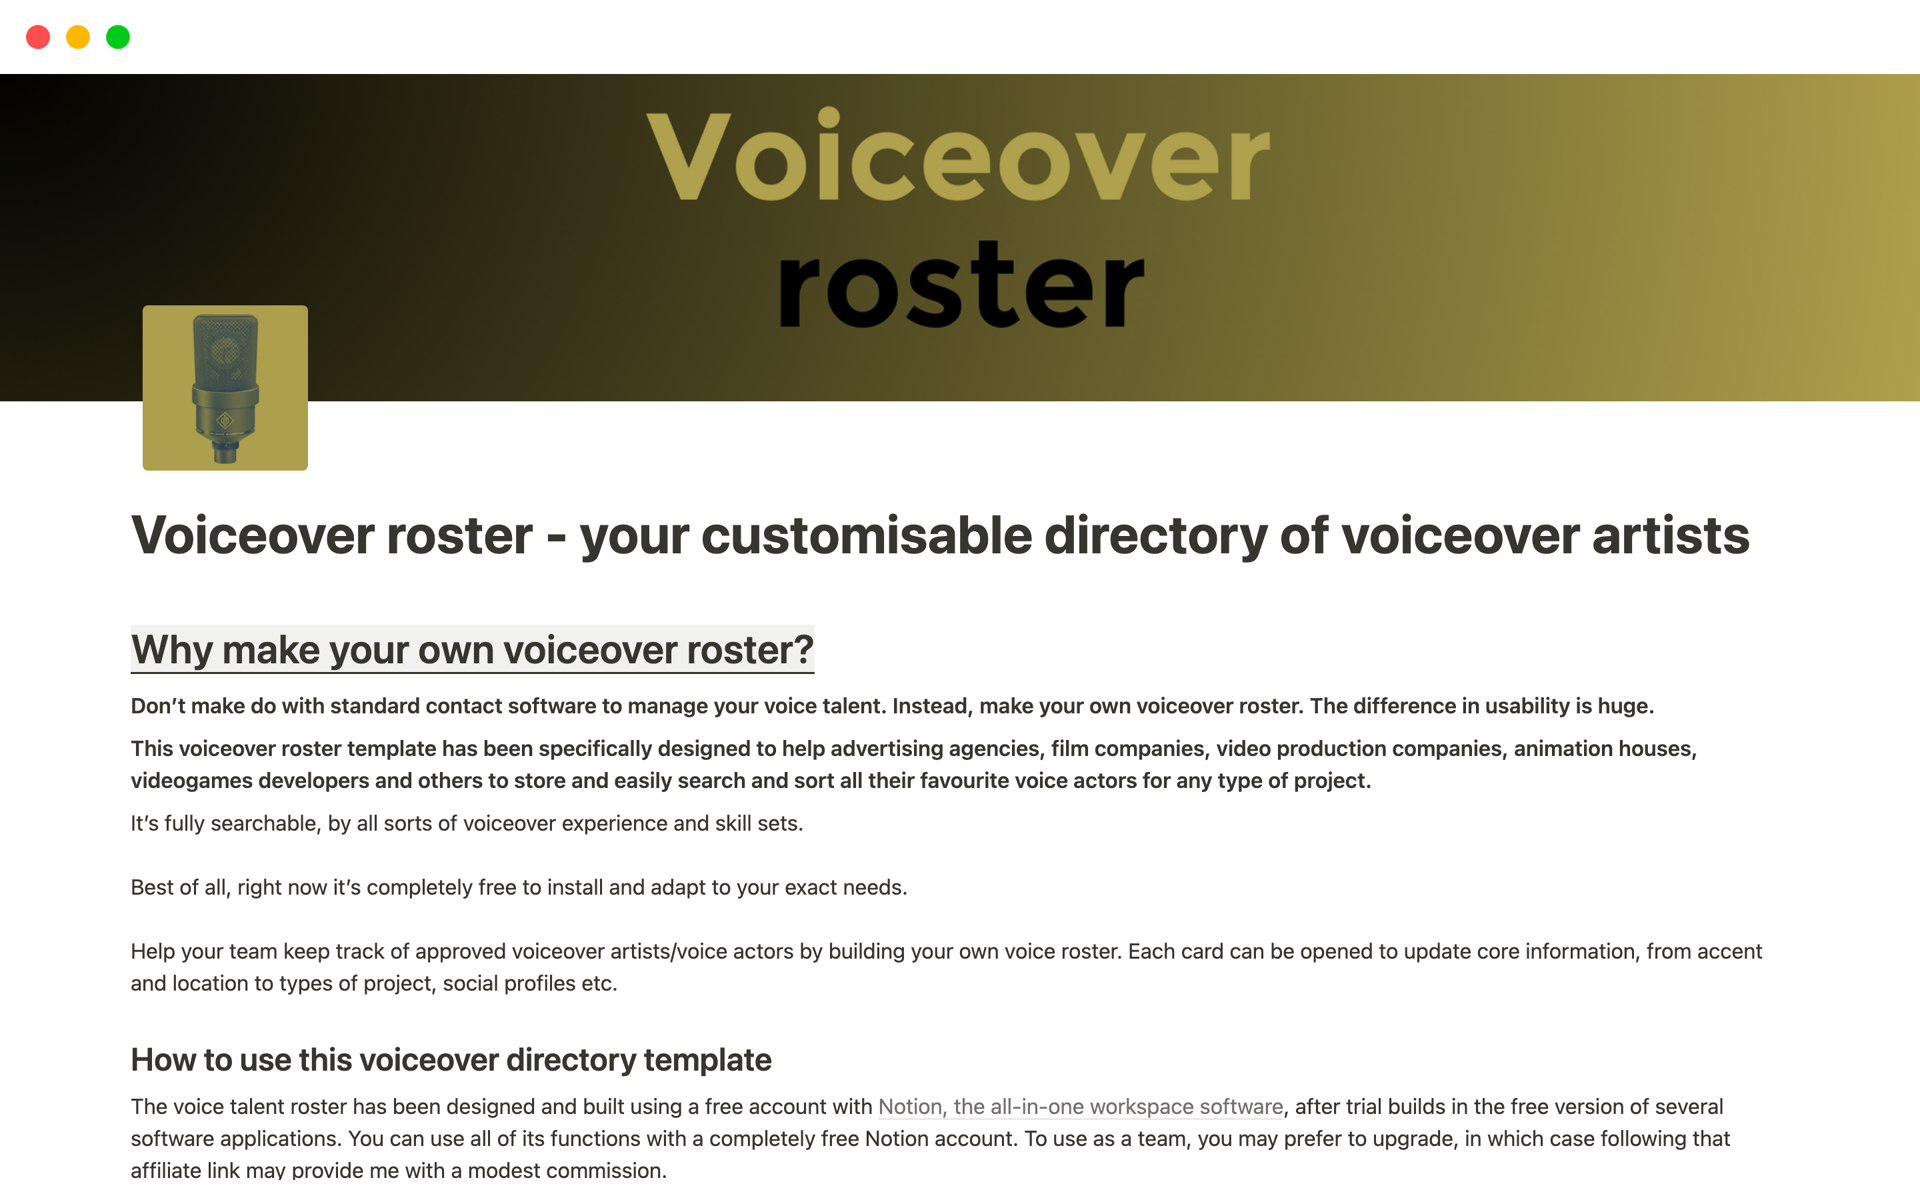 A template preview for Voiceover roster - a voice artist directory